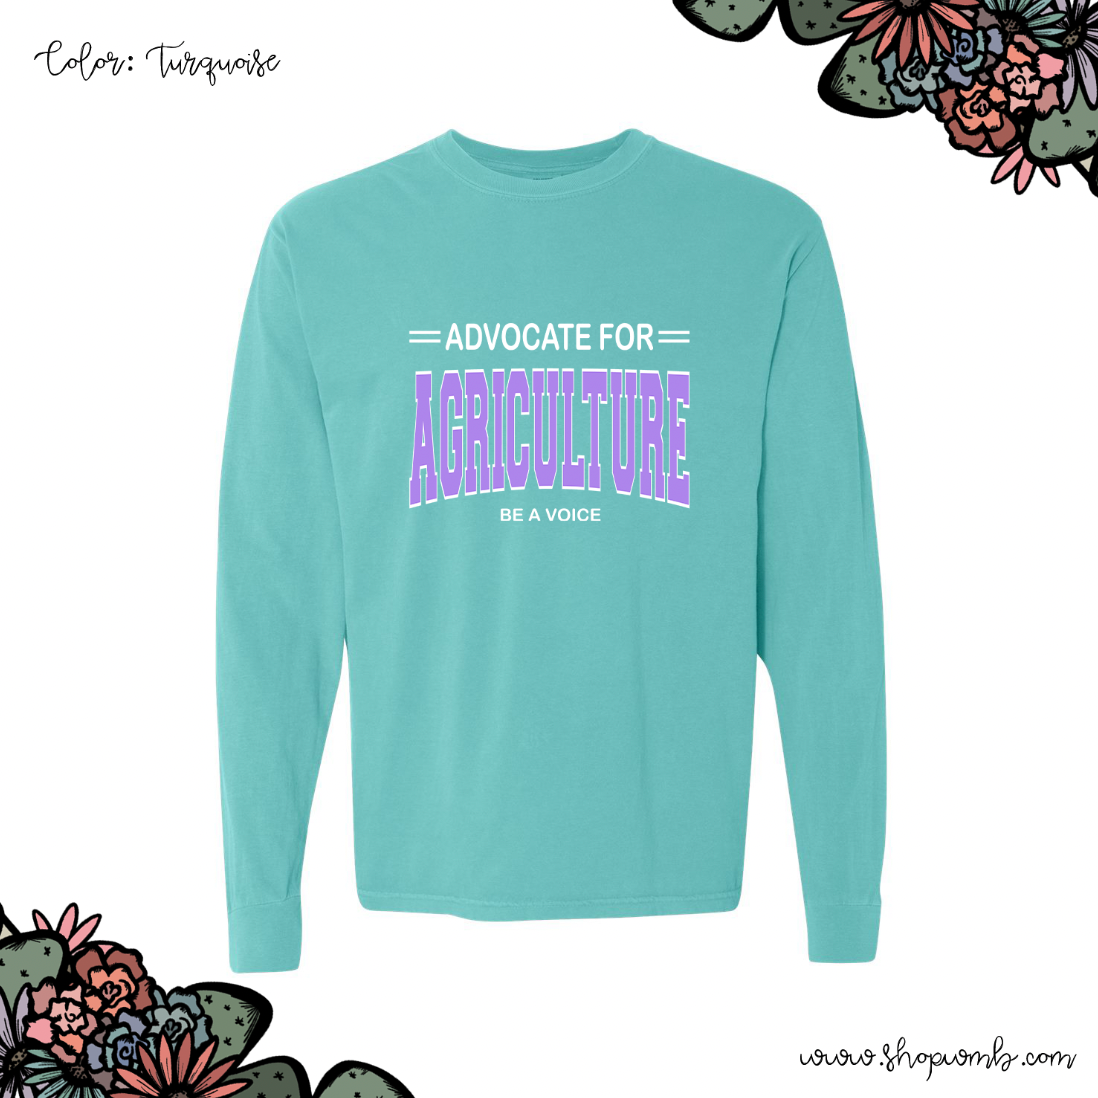 Advocate For Agriculture Be A Voice Purple Ink LONG SLEEVE T-Shirt (S-3XL) - Multiple Colors!